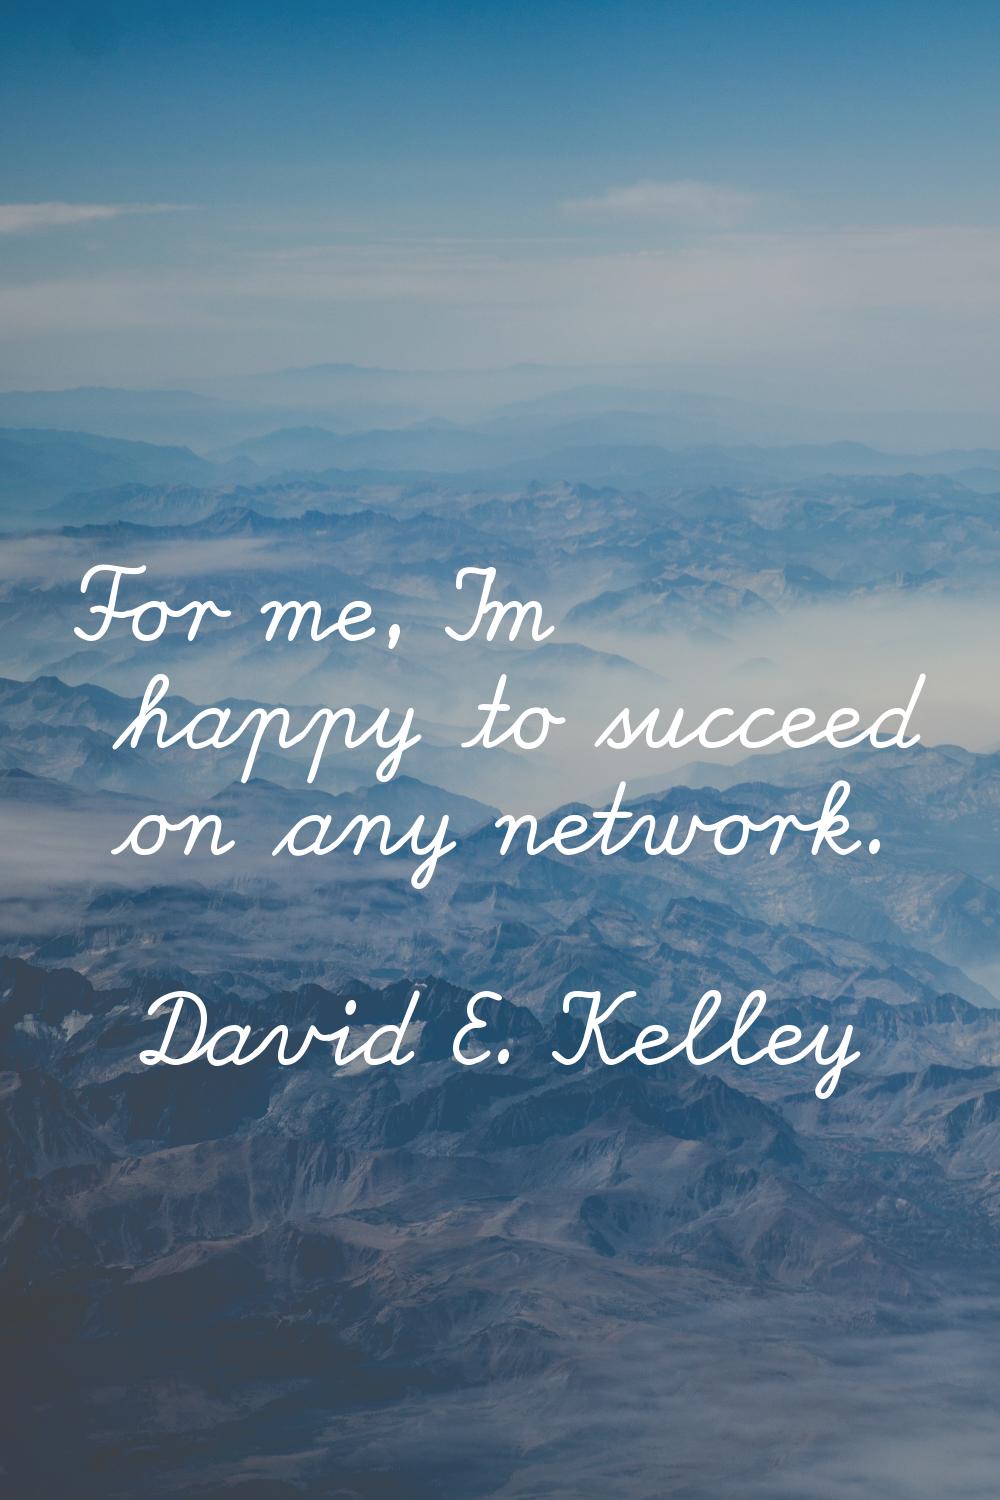 For me, I'm happy to succeed on any network.